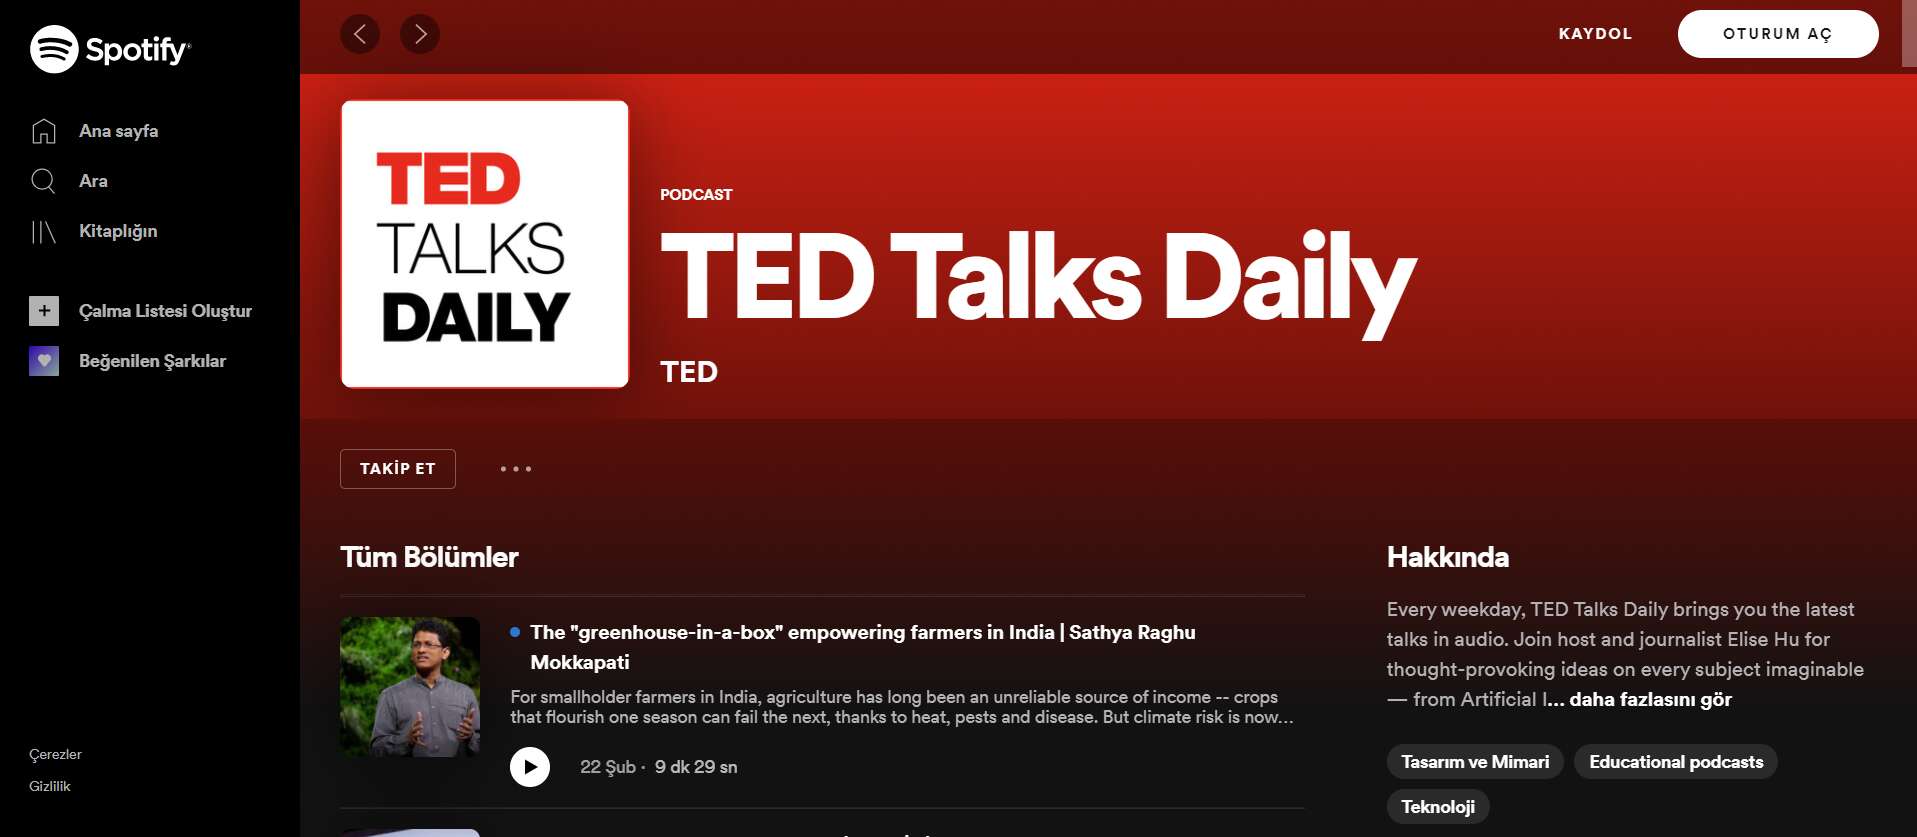 Ted Talks Daily 